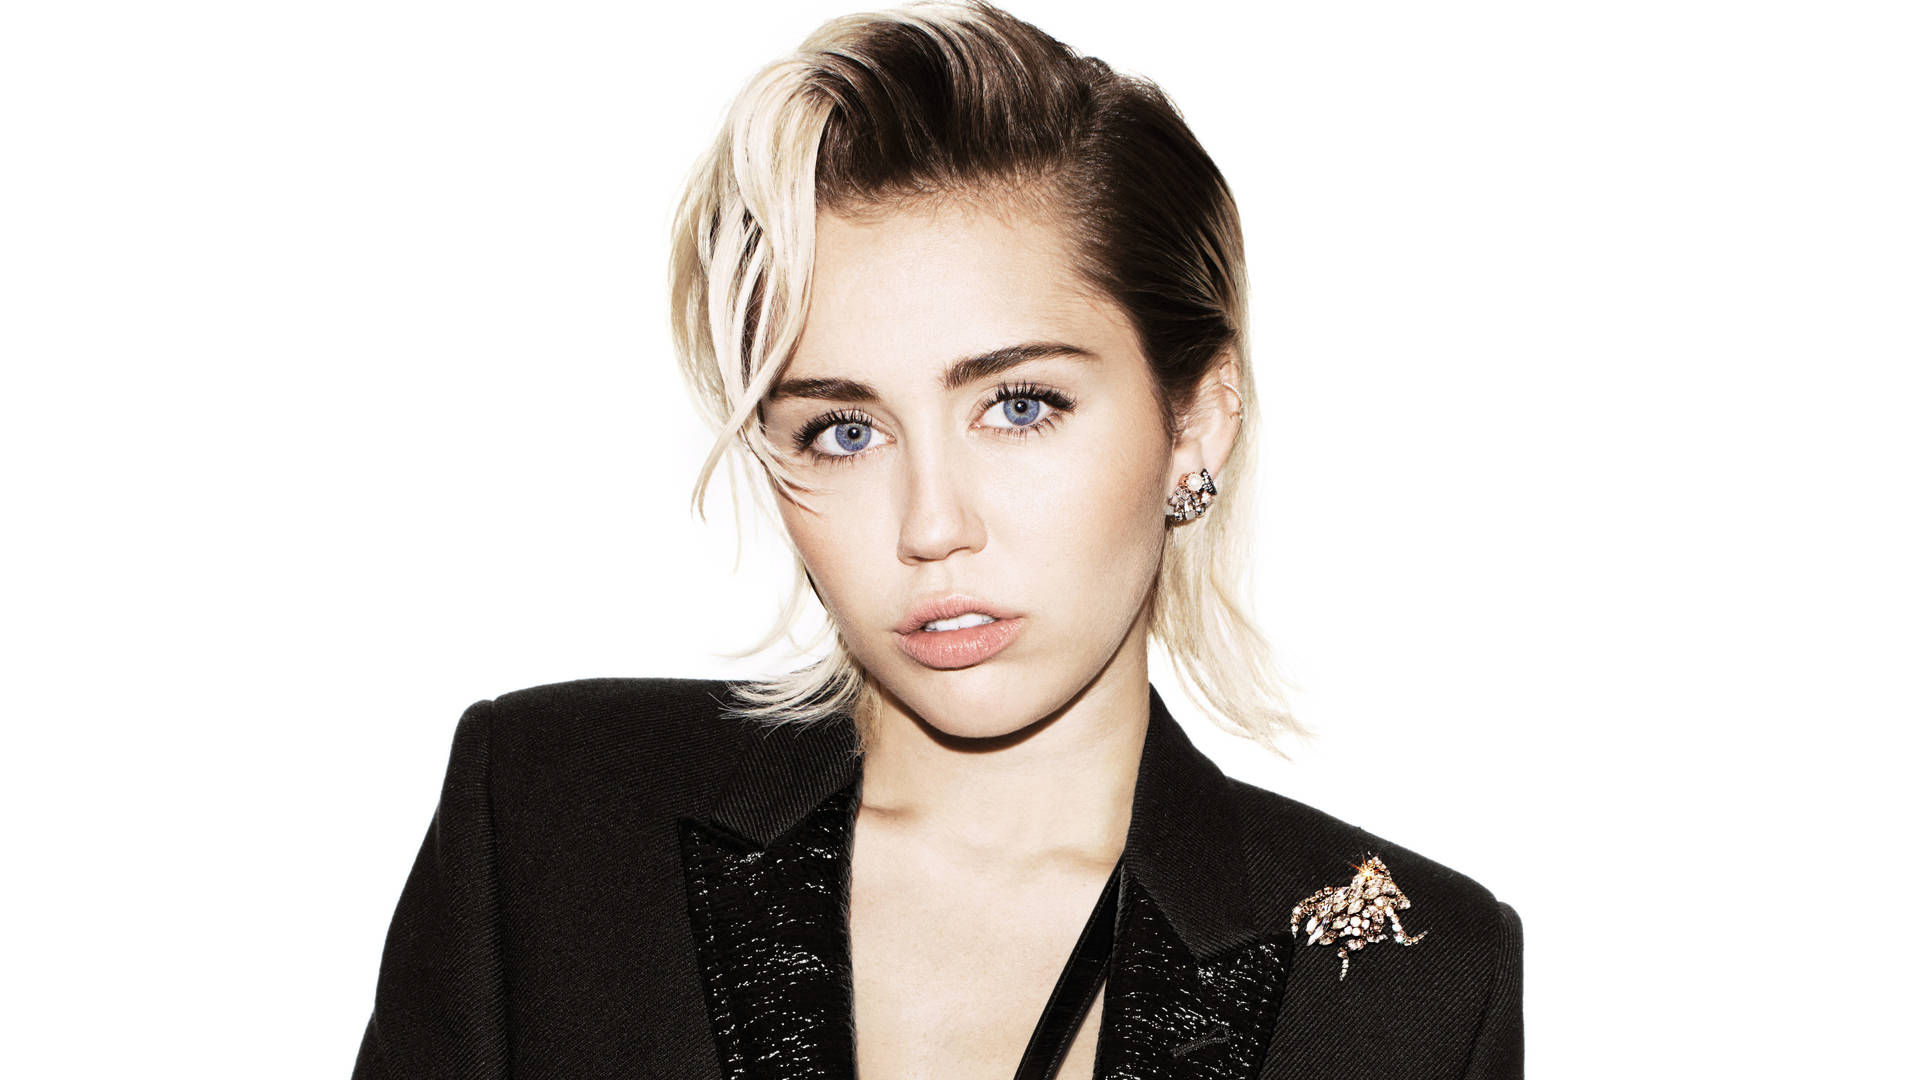 Miley Cyrus In Black Outfit Background